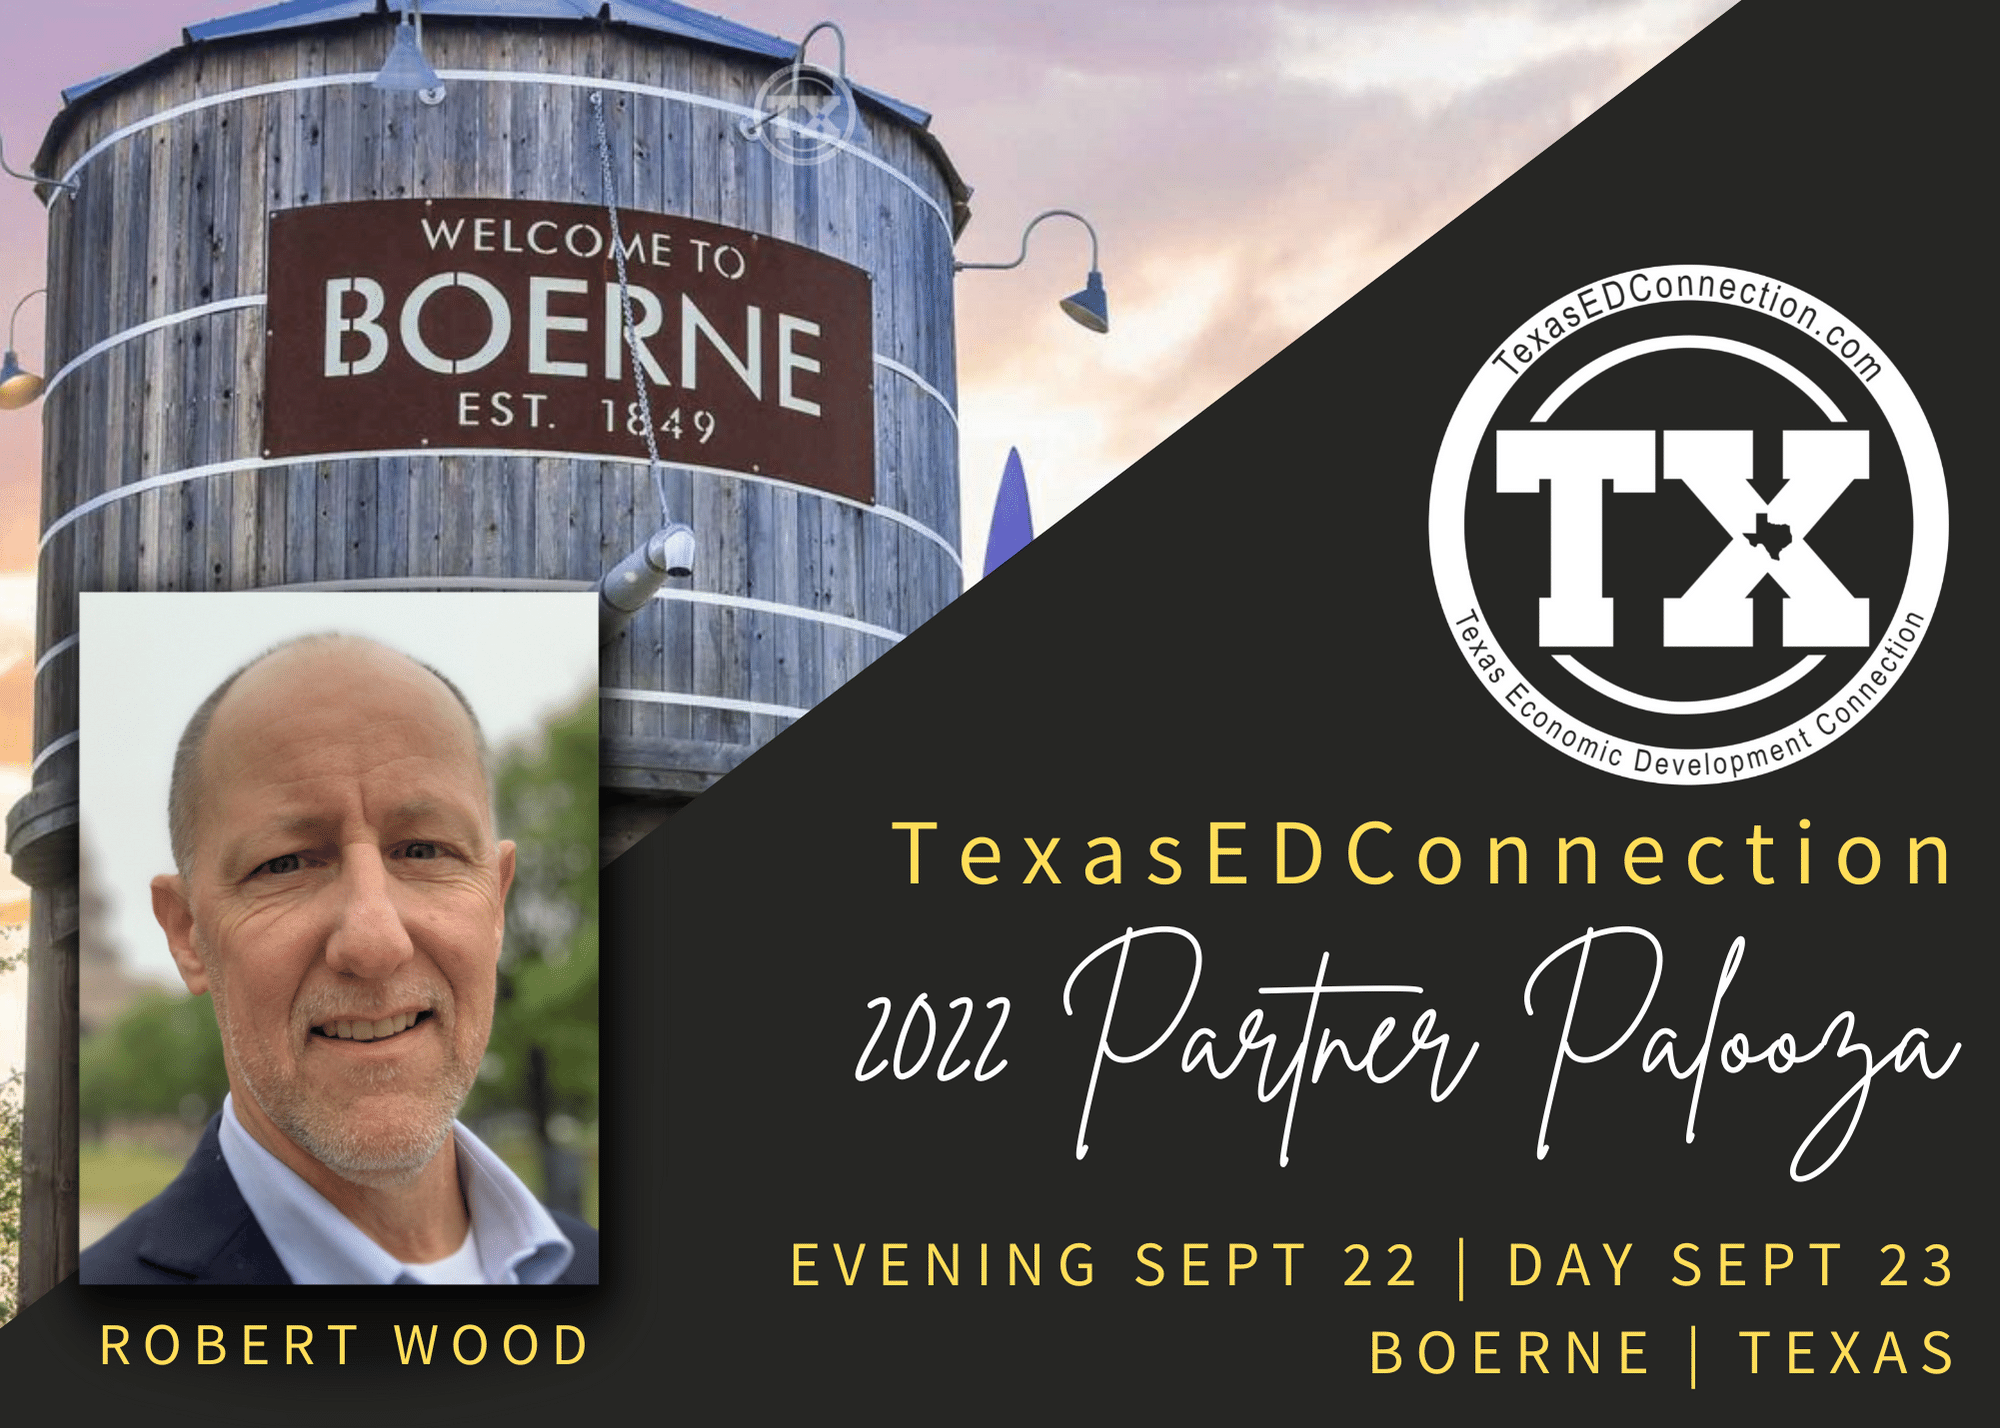 Robert Wood McGuireWoods Consulting headshot and details about TexasEDConnection Partner Palooza Sep 22 and 23 in Boerne Texas